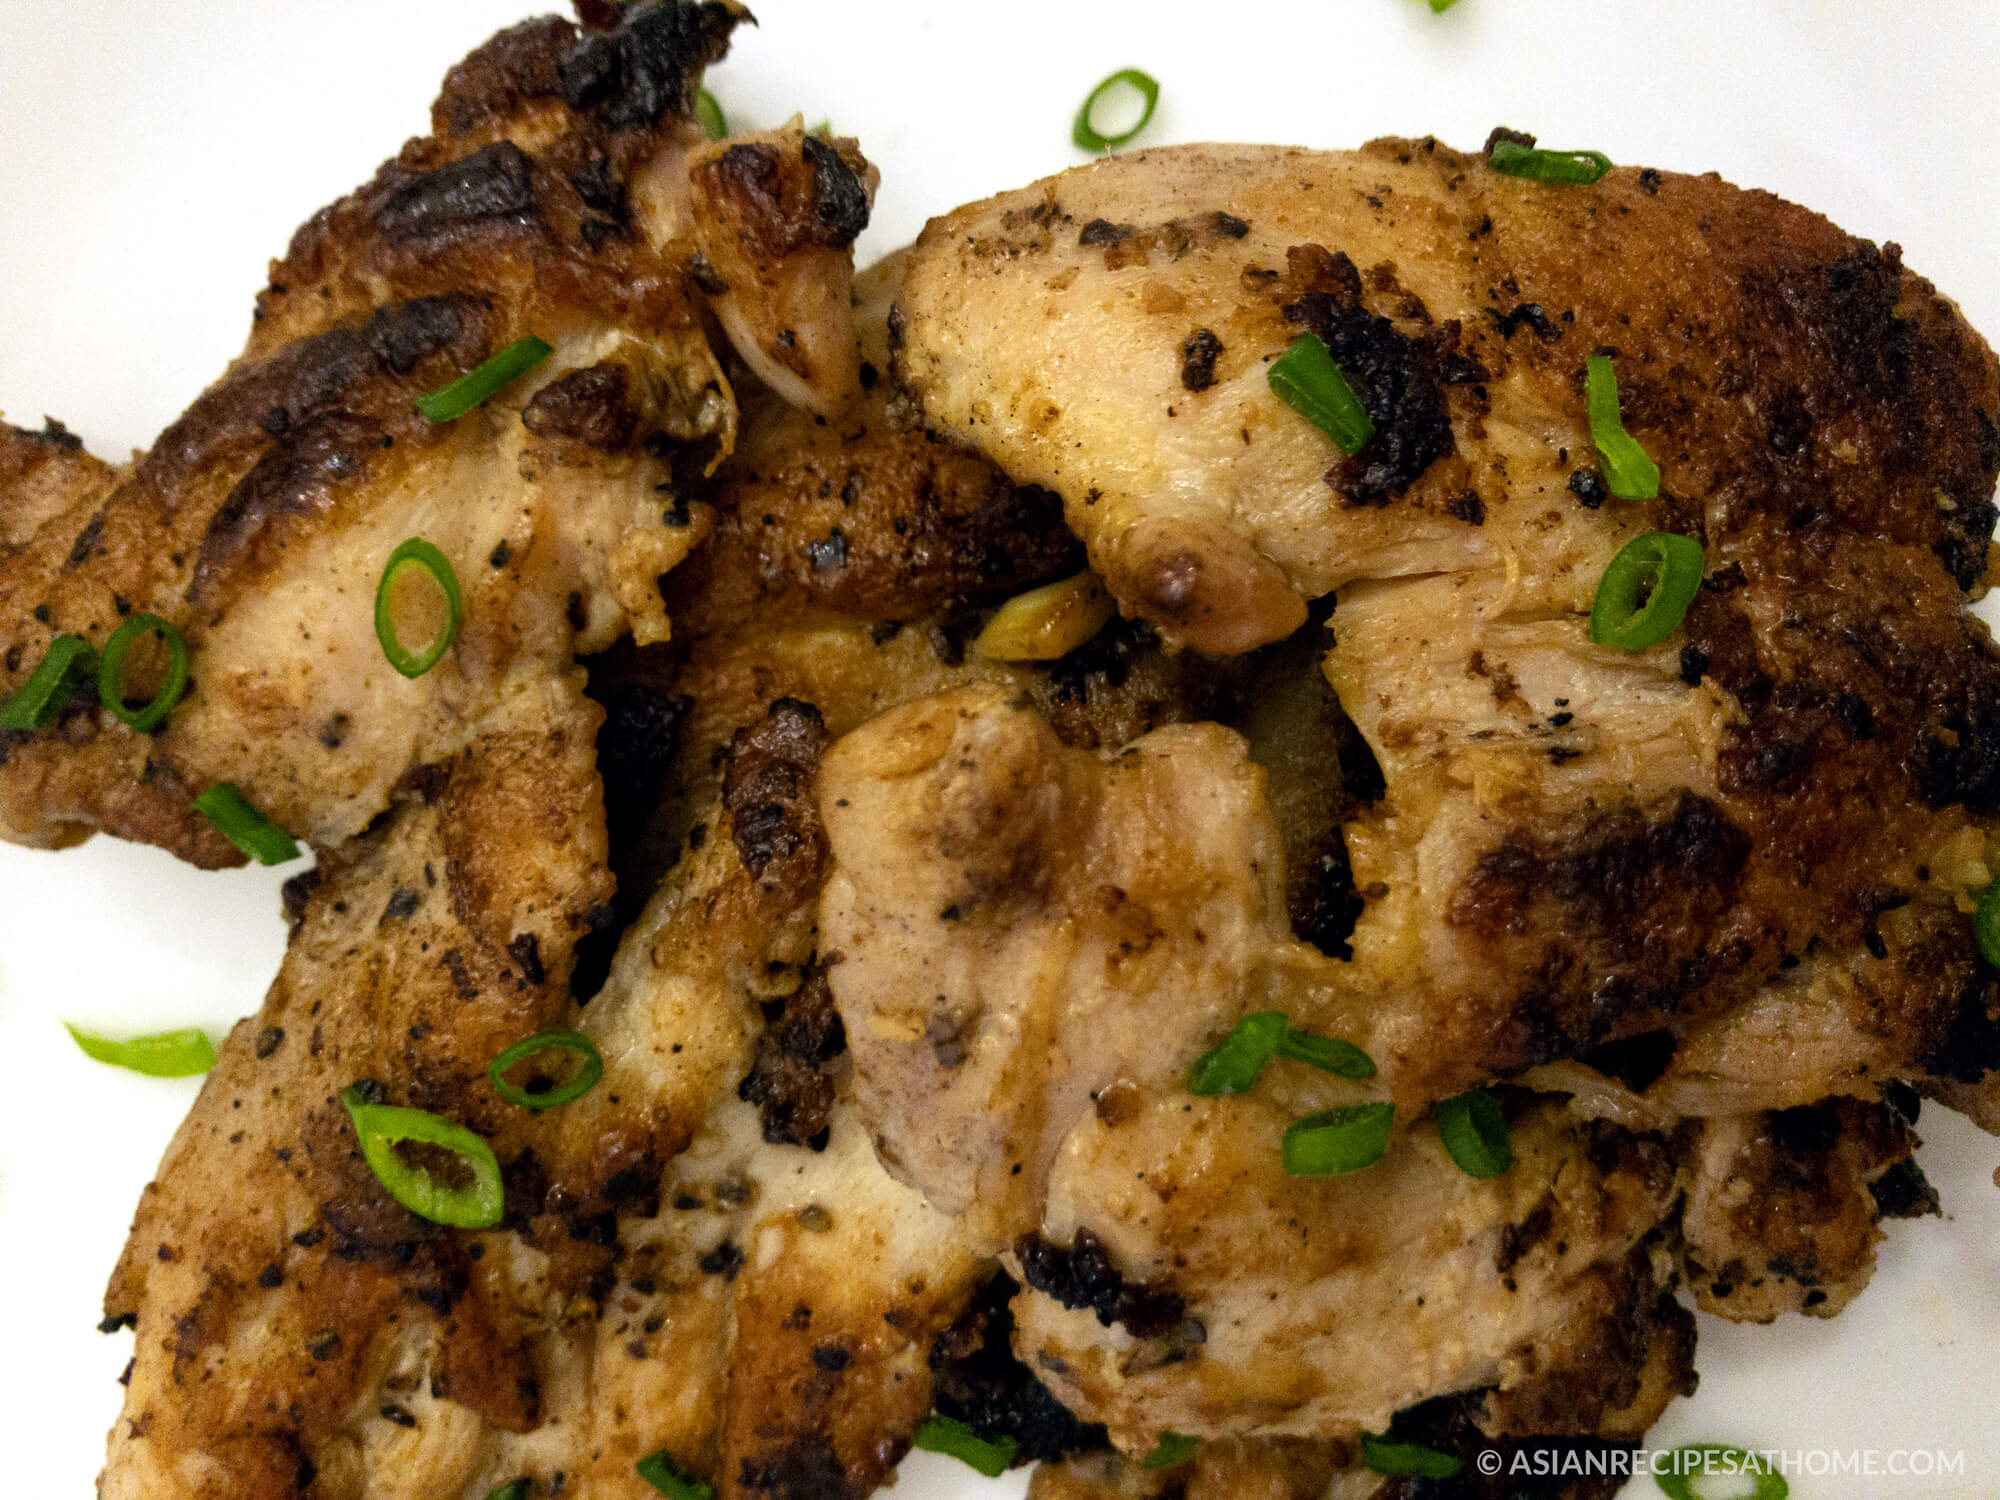 Cast Iron Asian Chicken – Browned seasoned chicken thighs are seared to perfection in a cast iron pan. This recipe is delicious, easy and healthy. It just so happens to be Paleo, gluten-free and Whole30 compliant as well.